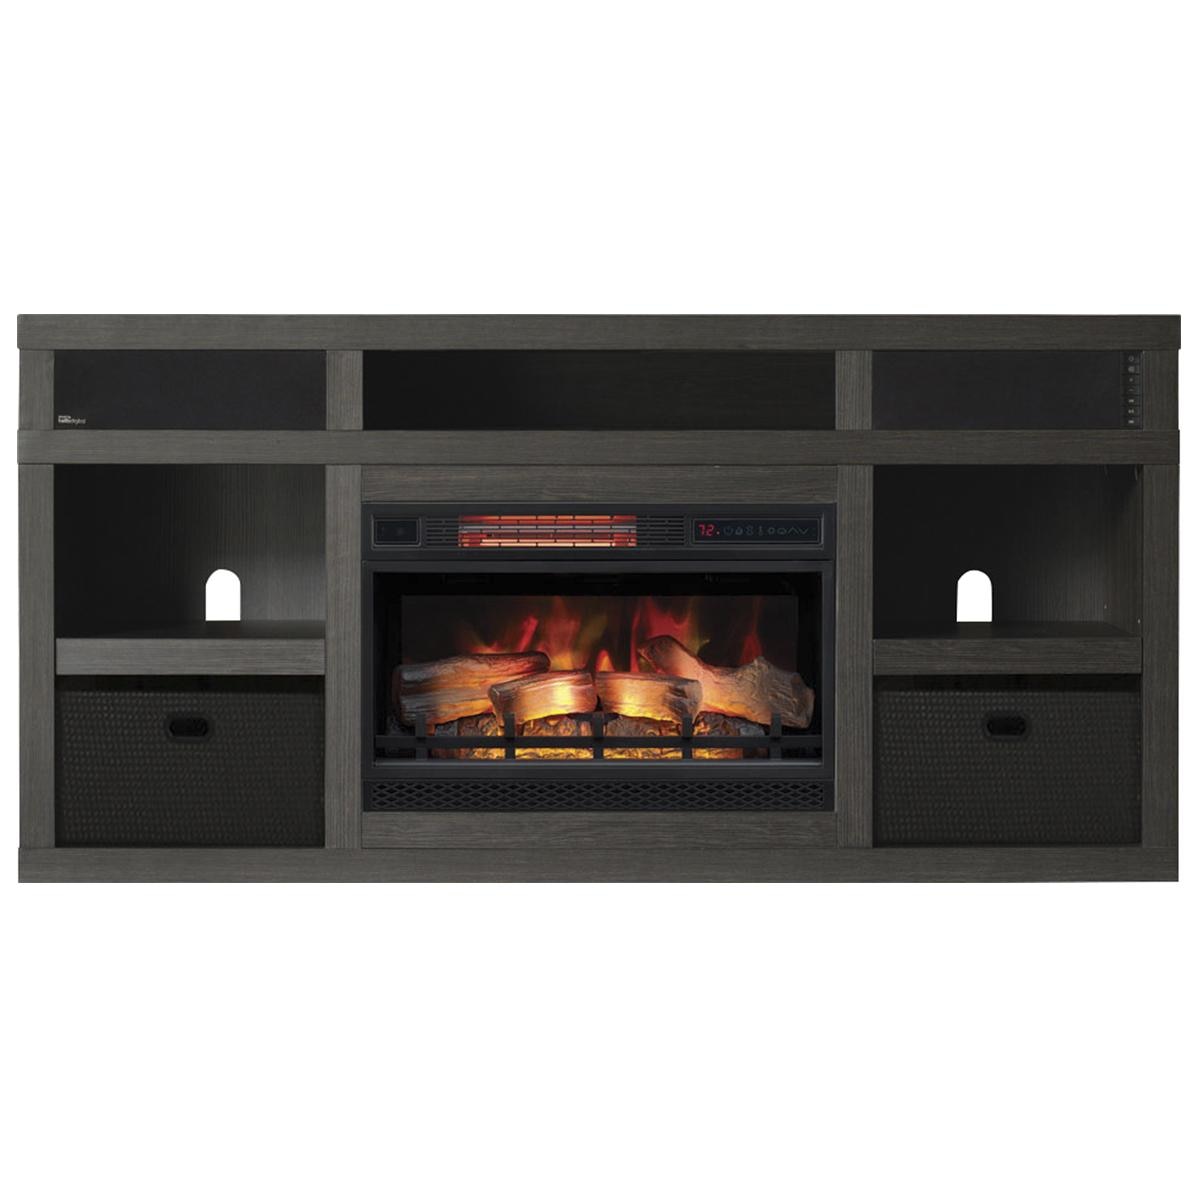 Bench In Front Of Fireplace Beautiful Fabio Flames Greatlin 3 Piece Fireplace Entertainment Wall